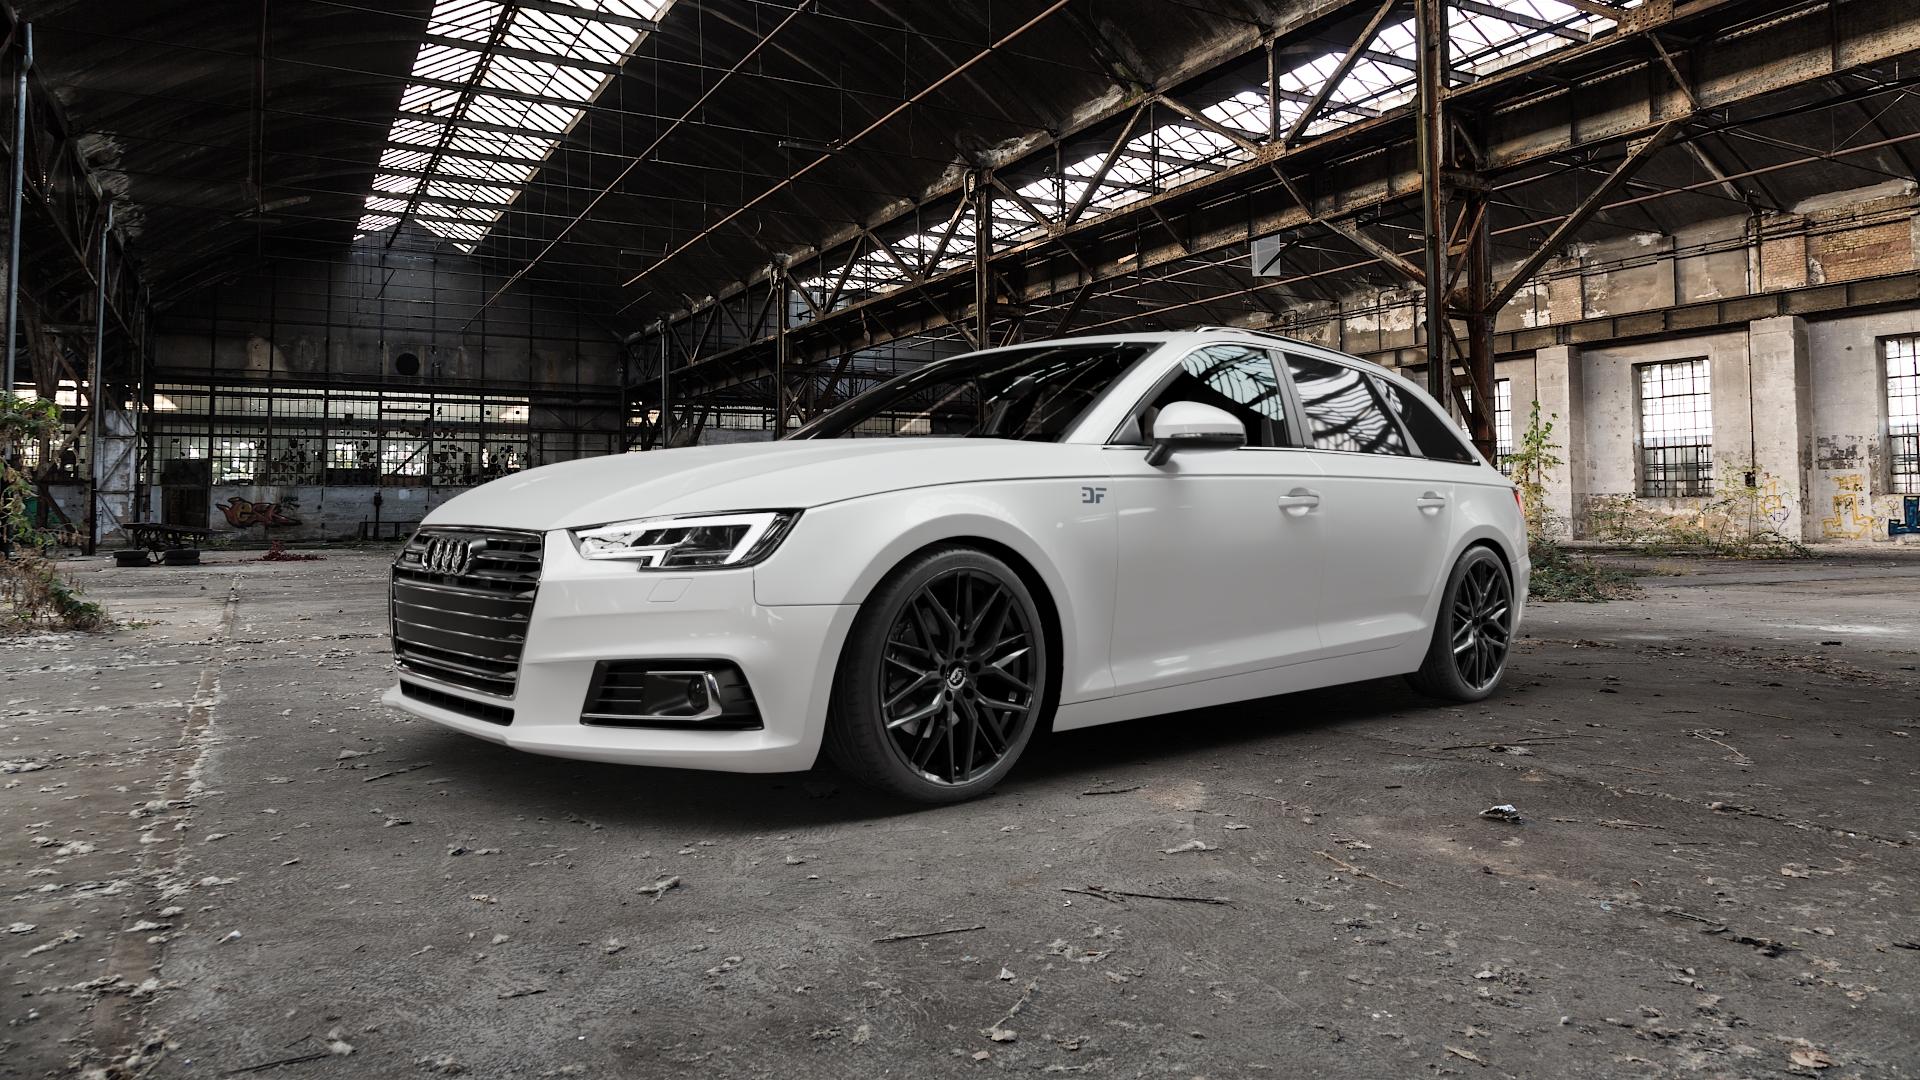 Audi A4 Type B9 (Avant) 2,0l TFSI 185kW (252 hp) Wheels and Tyre Packages